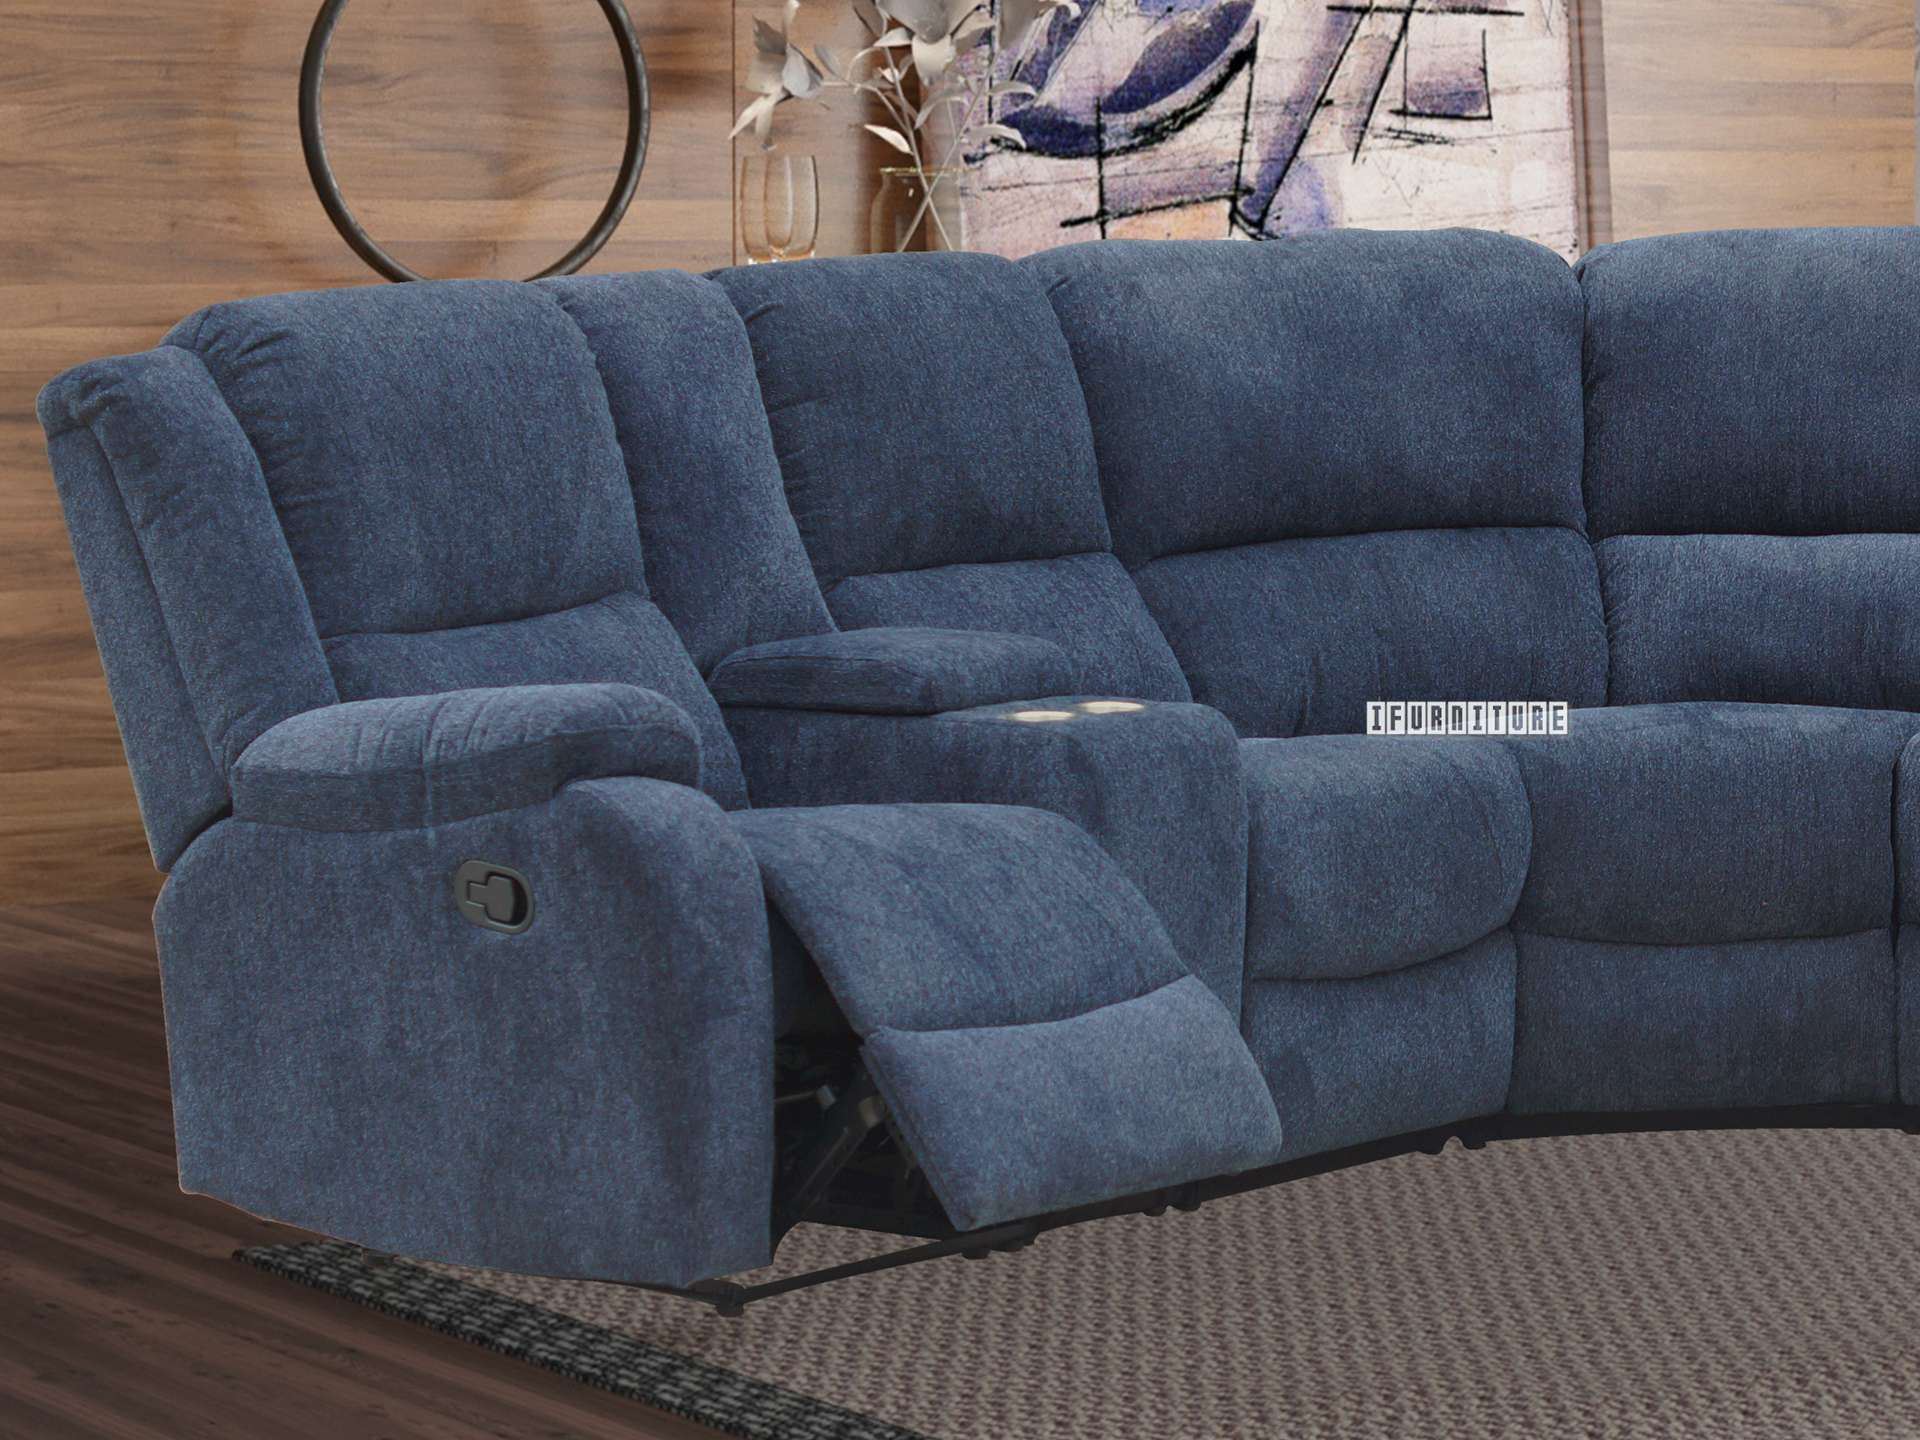 0034314 Alto Sectional Modular Reclining Sofa With Chaise Cup Holders And Storage 